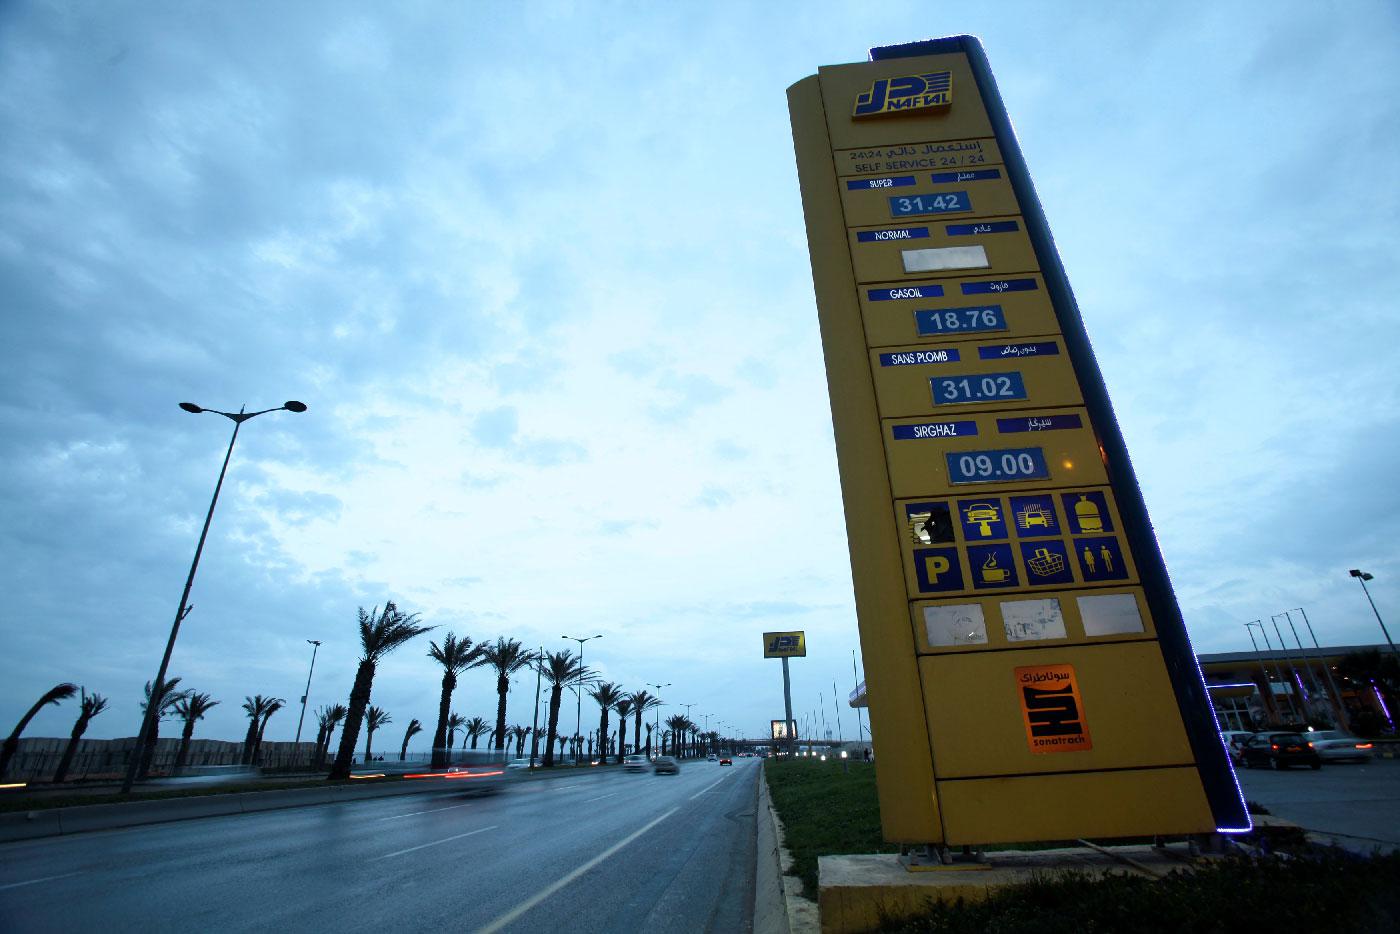 A Naftal billboard shows prices at the entrance of the fuel station in the highway of Algiers, Algeria February 3, 2016.